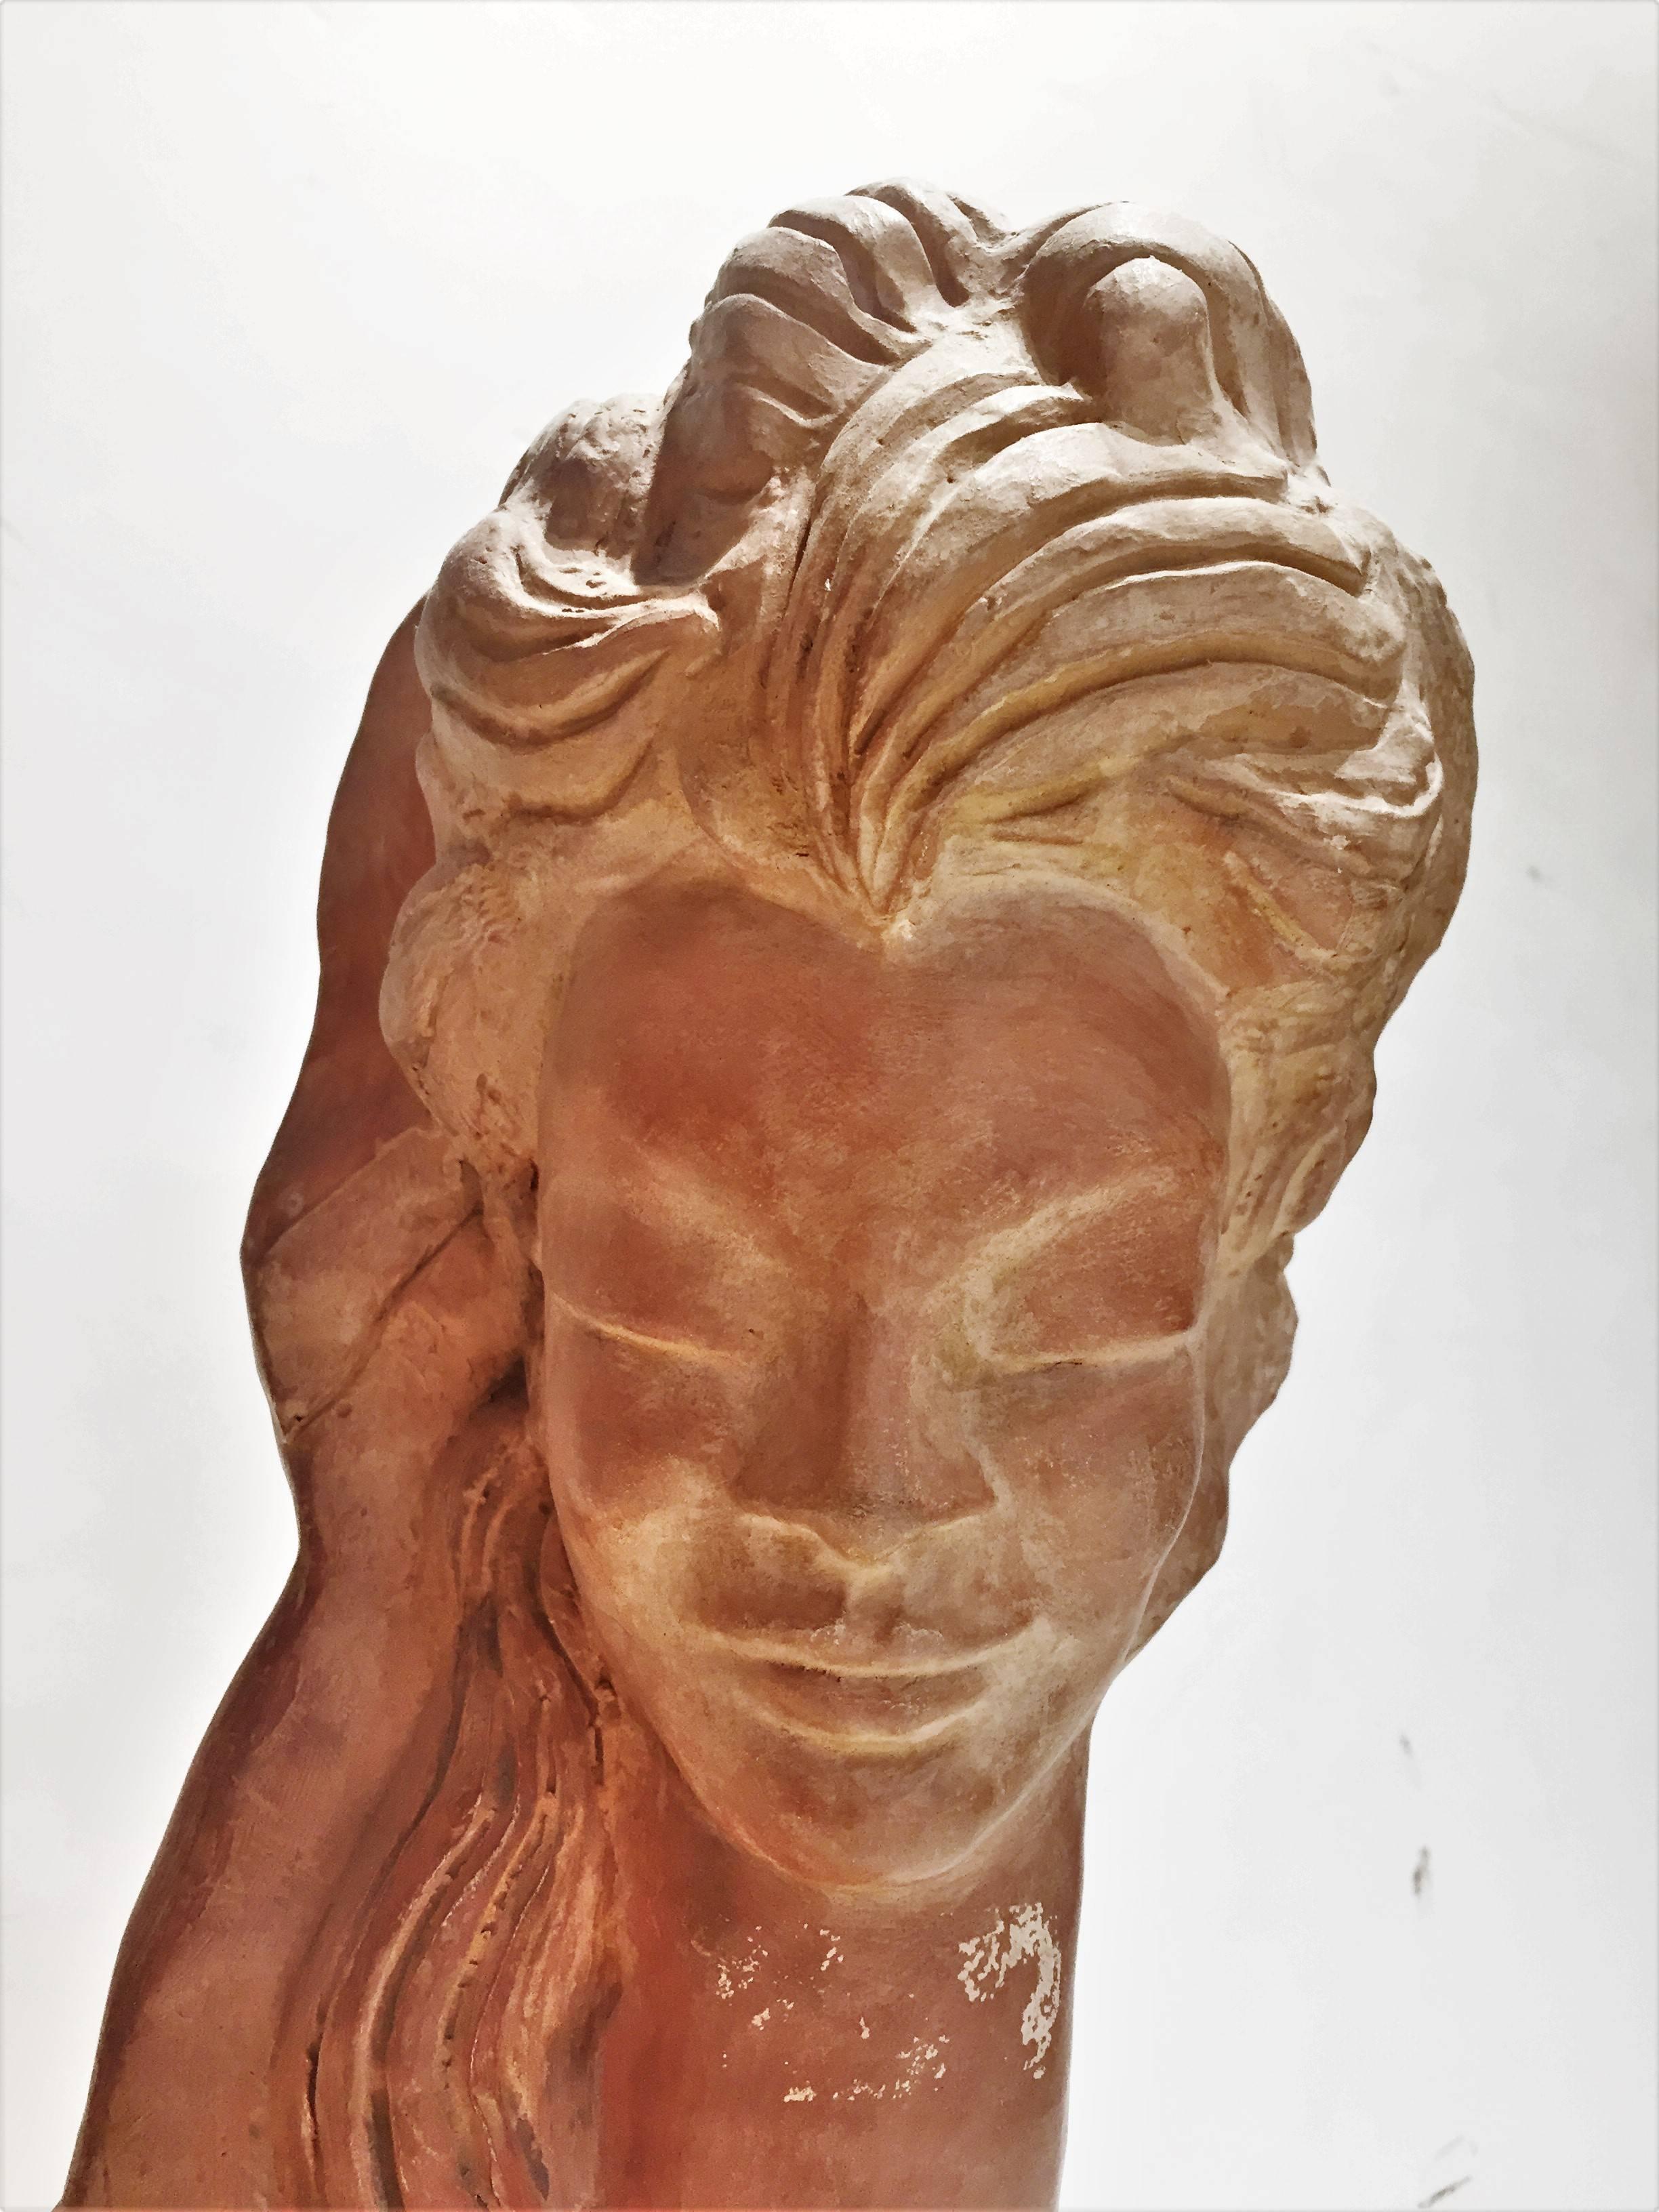 Elegant in its simplicity, this bust depicts the head of a beautiful young woman with her hair spread out over her shoulders and her eyes closed